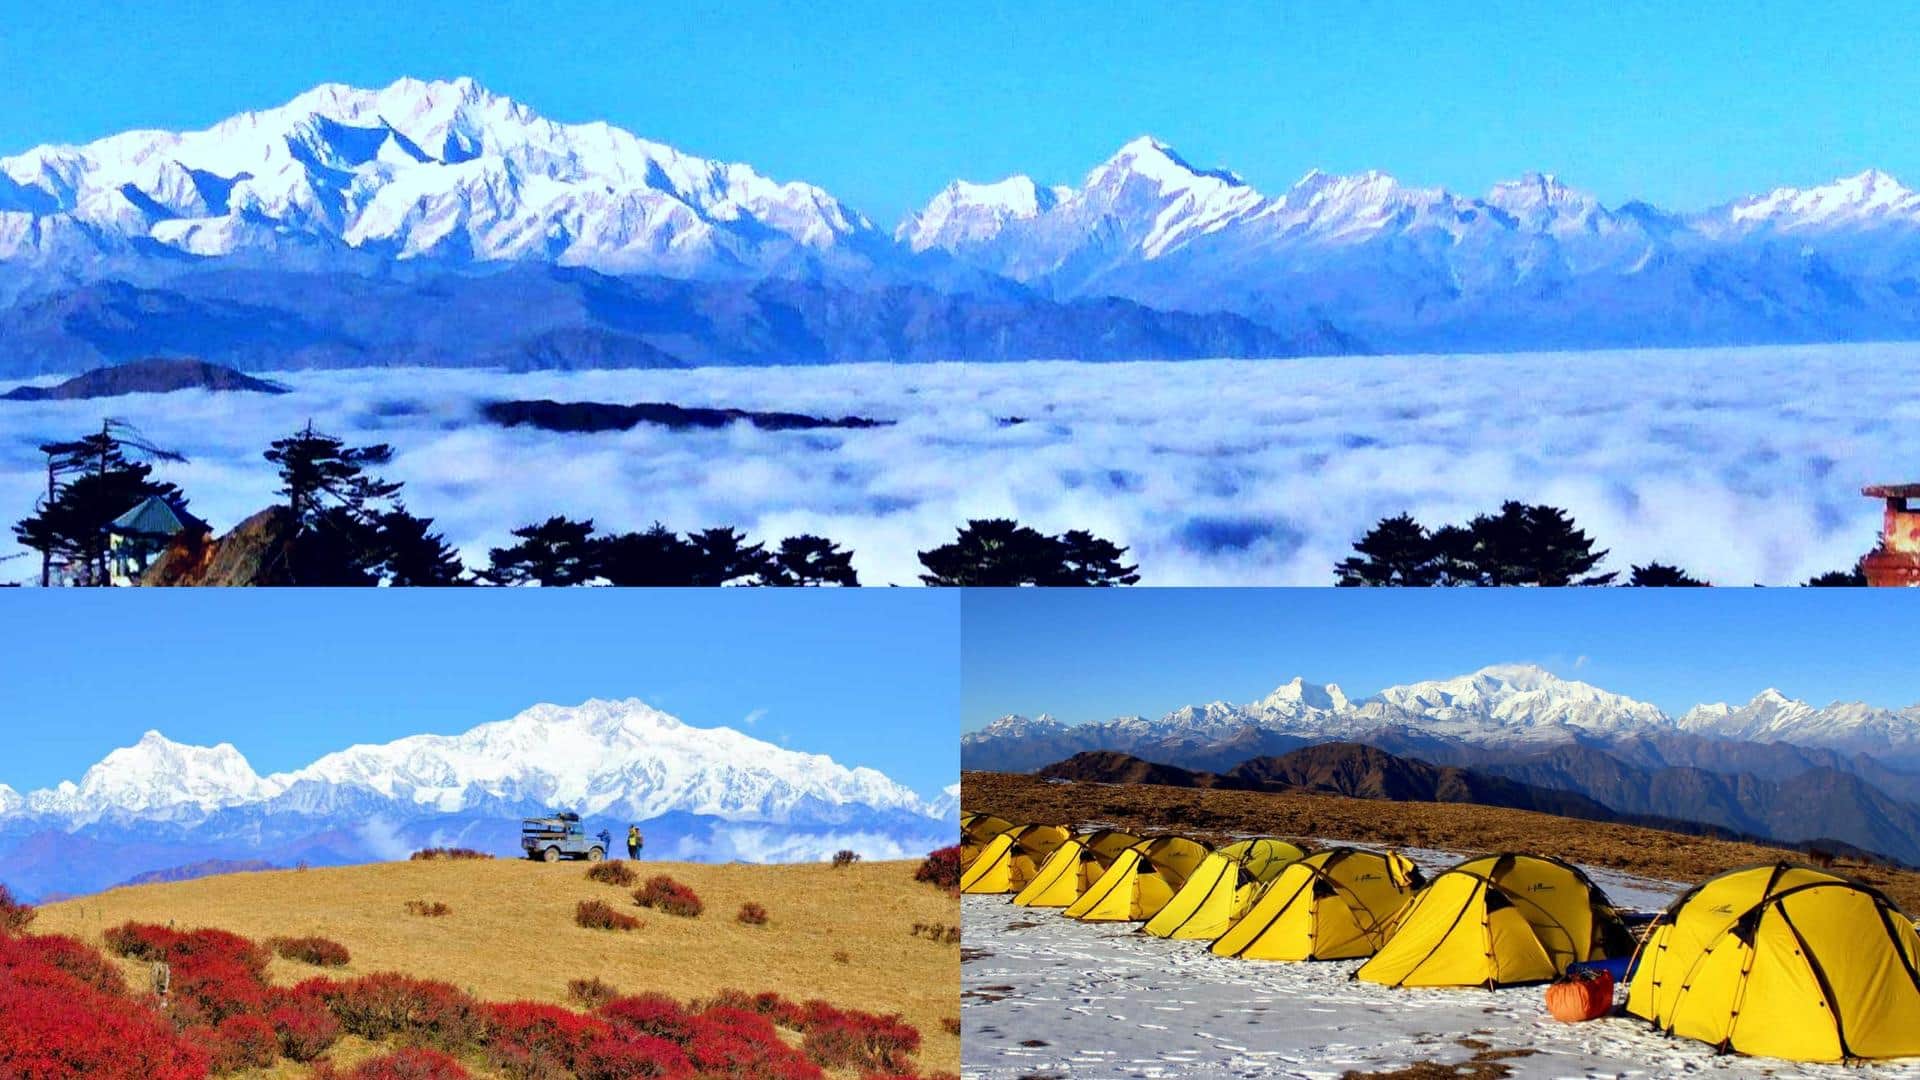 Traveling to Sandakphu? Visit these beautiful places